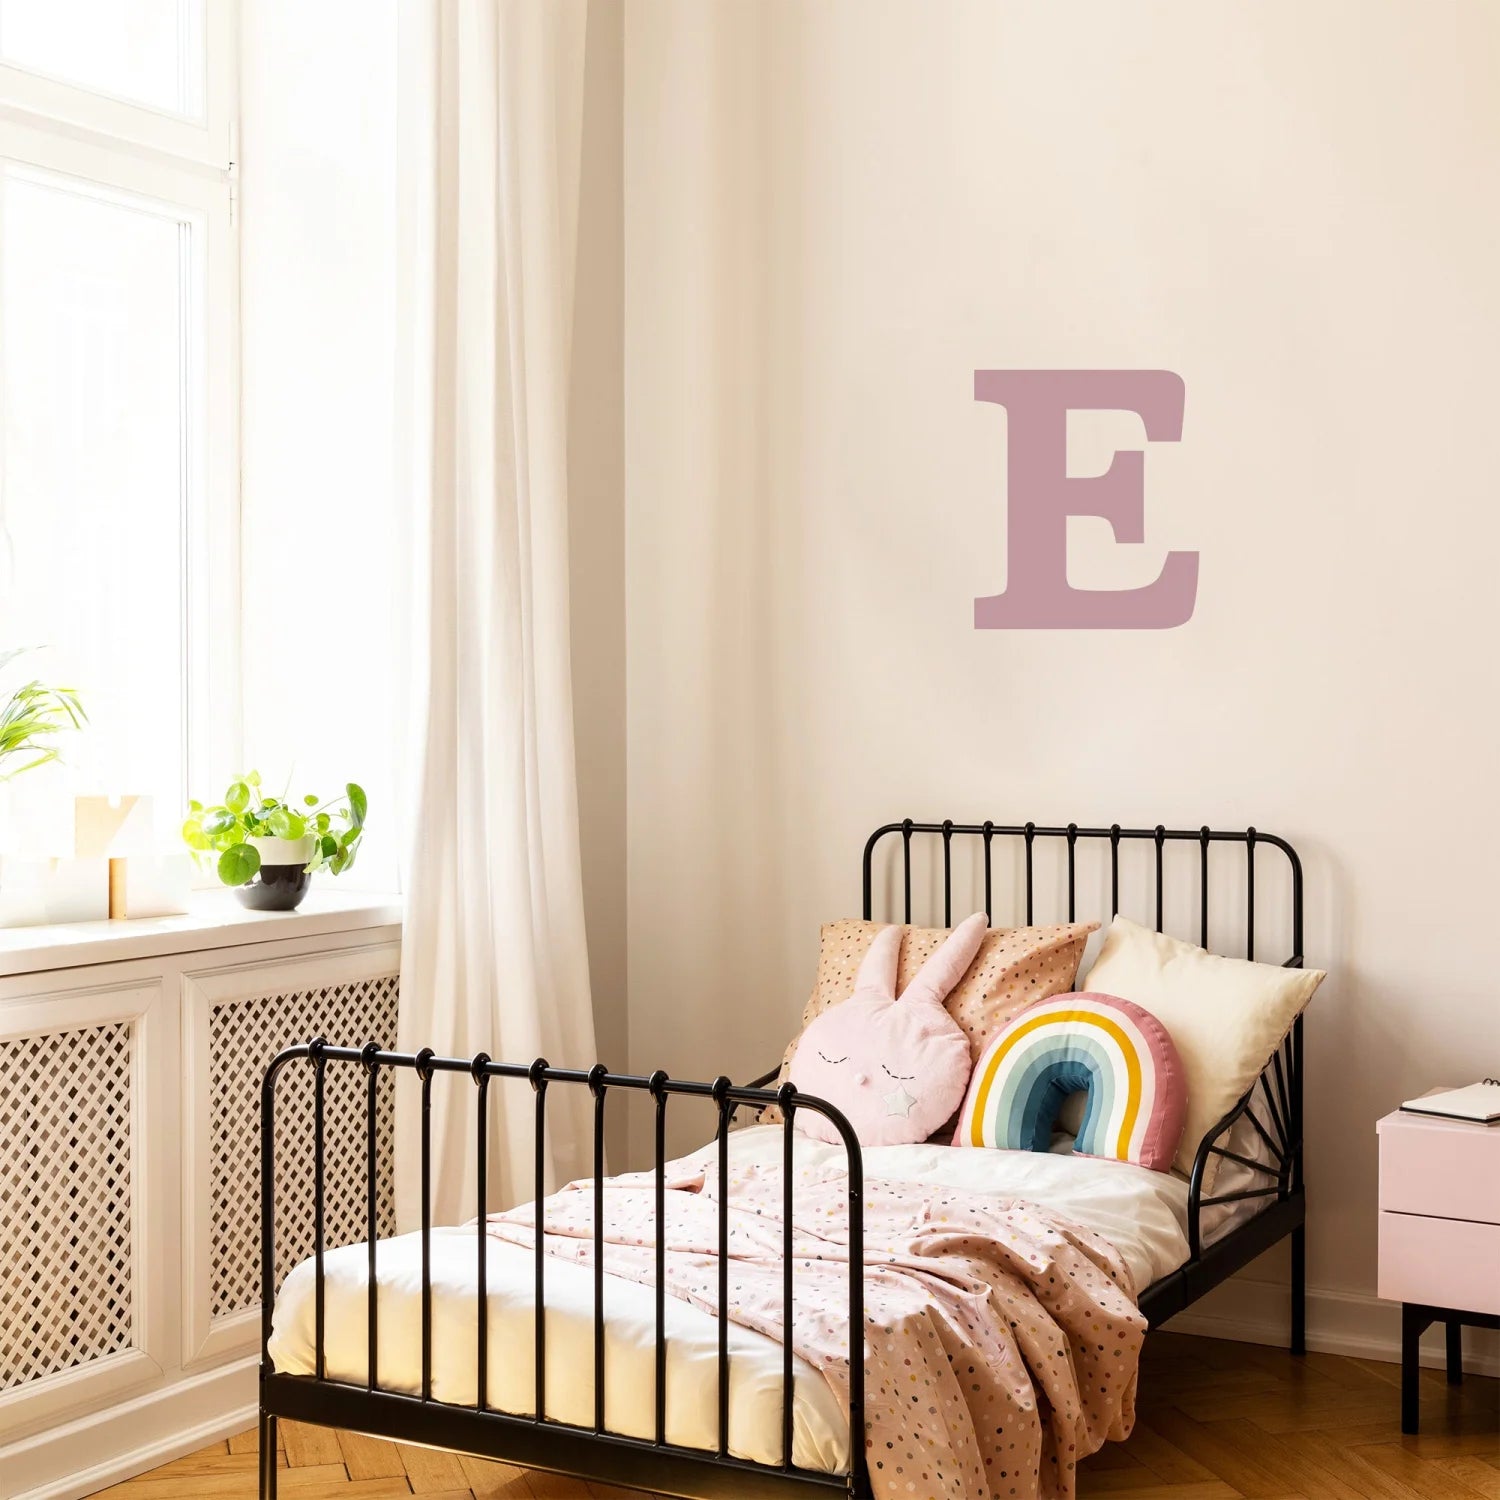 Letter E Initial Decal - Decals - Initials